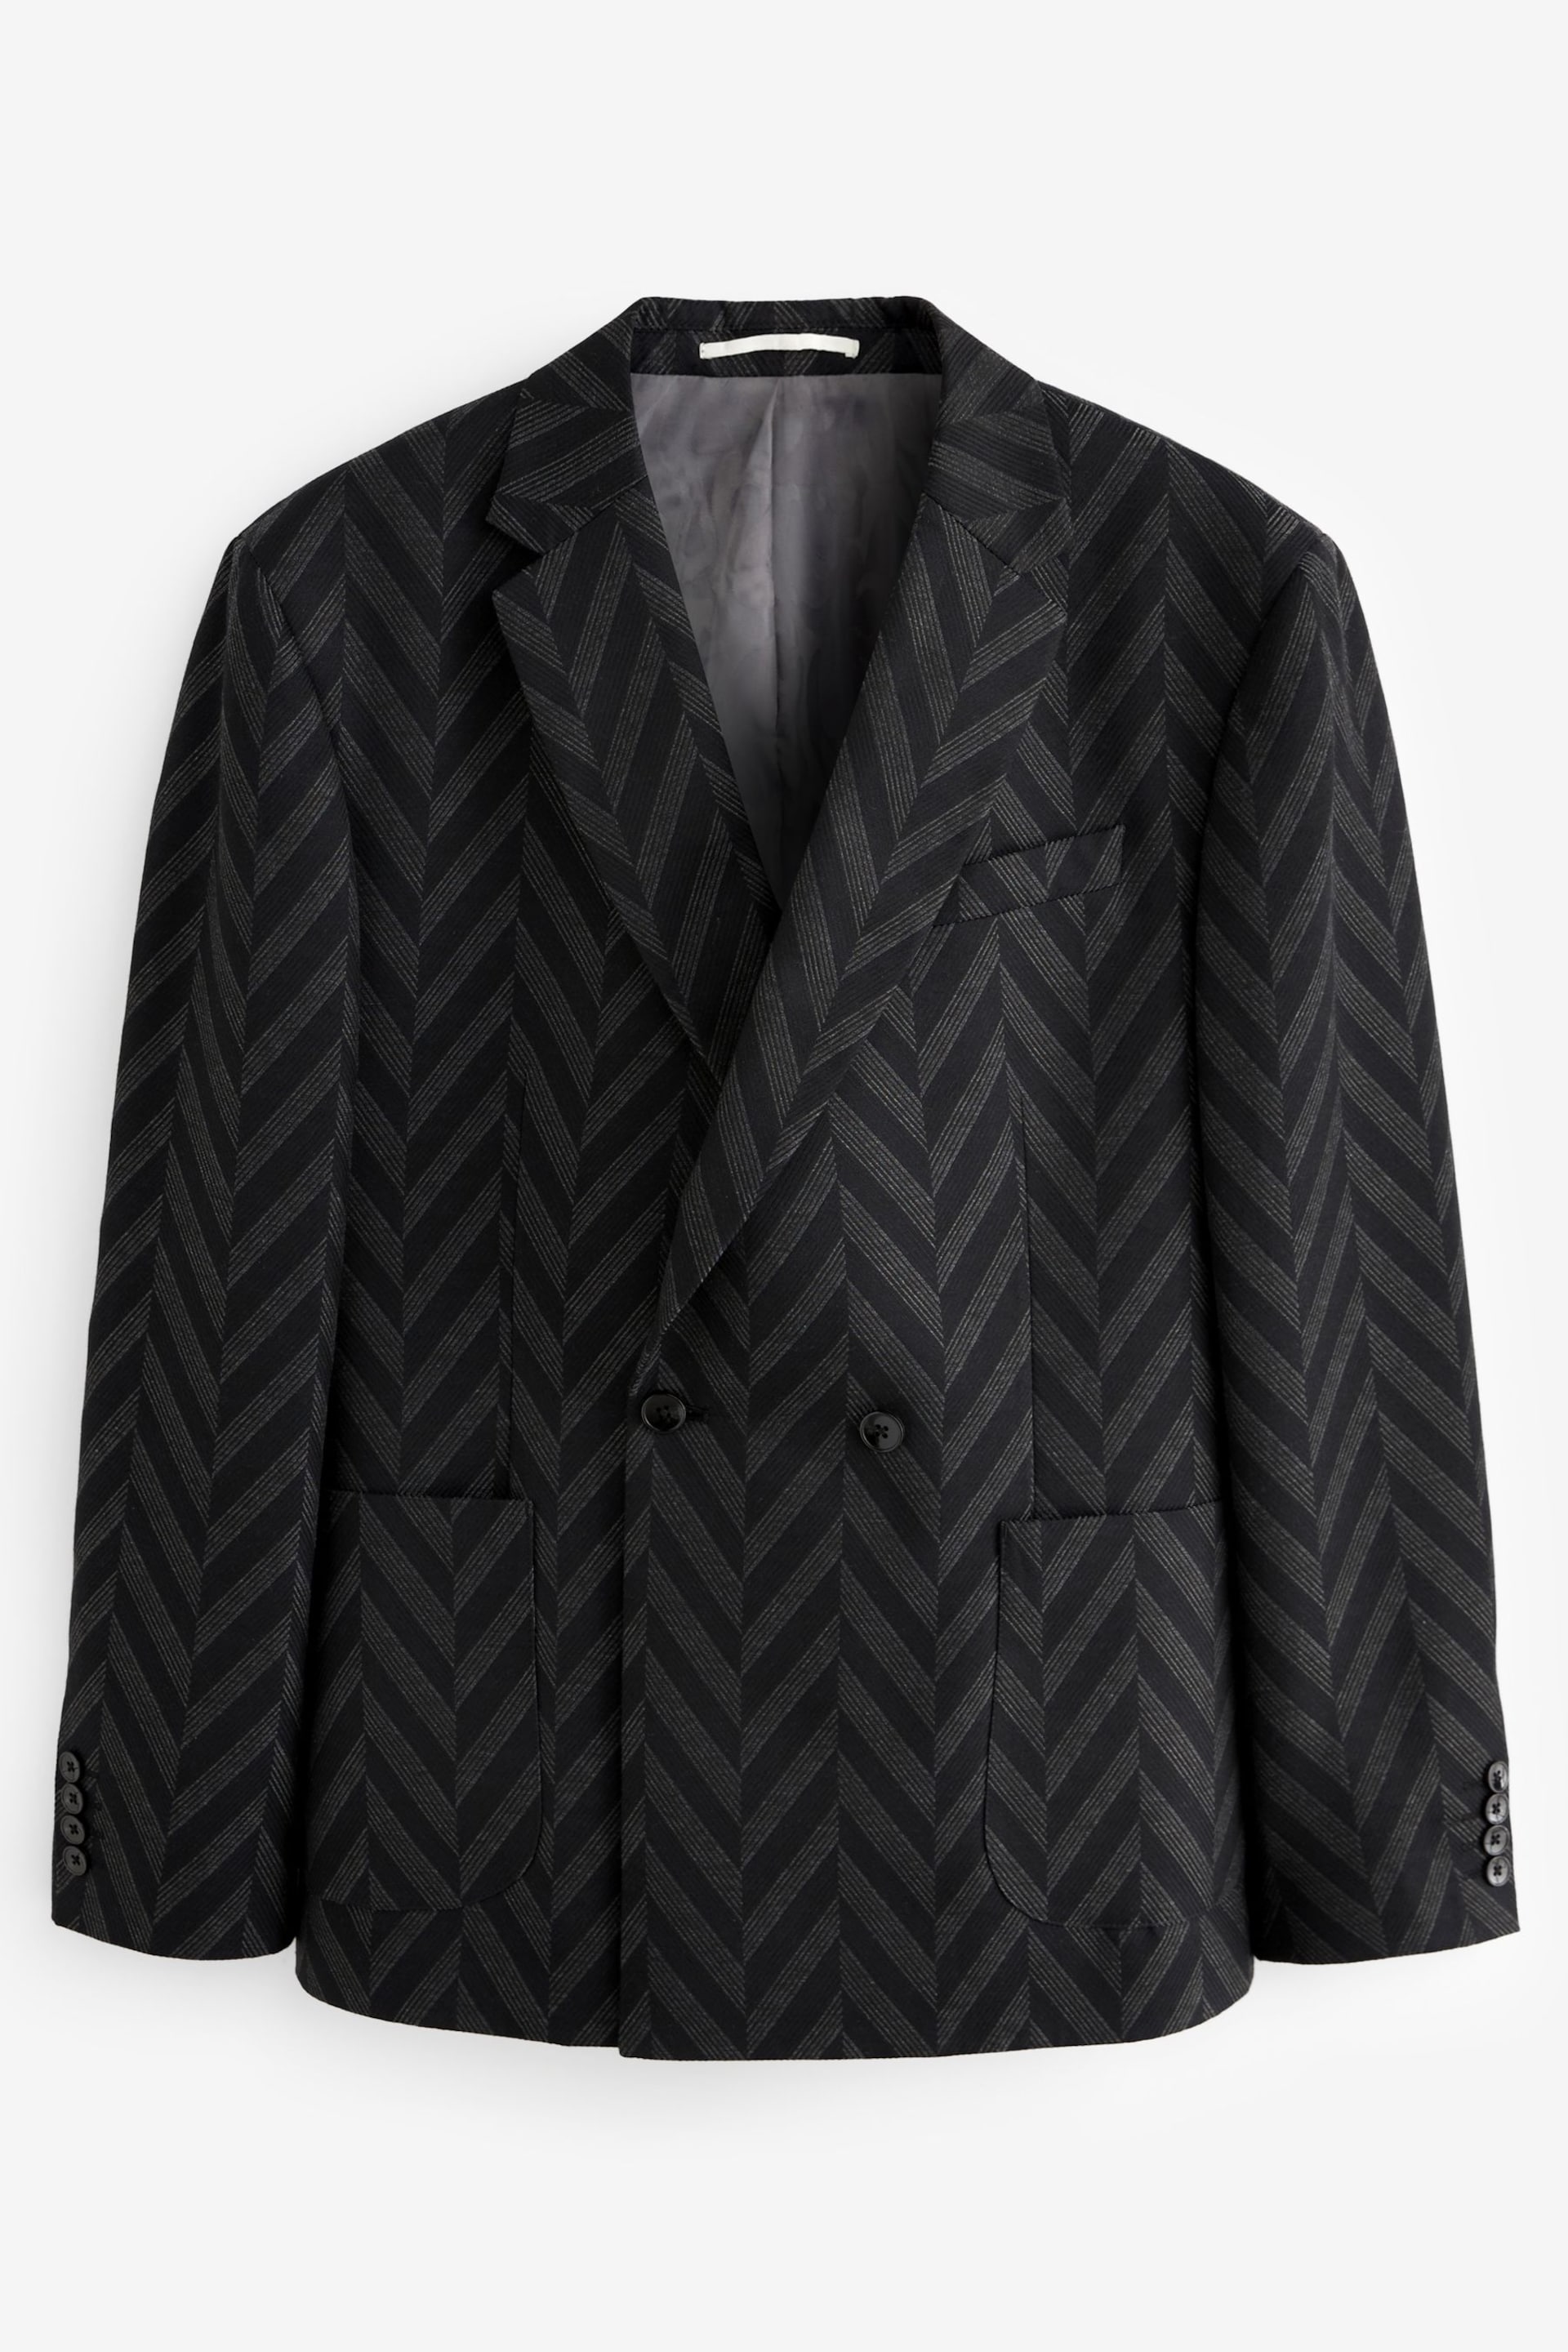 Charcoal Grey EDIT Relaxed Pattern Suit Jacket - Image 6 of 9